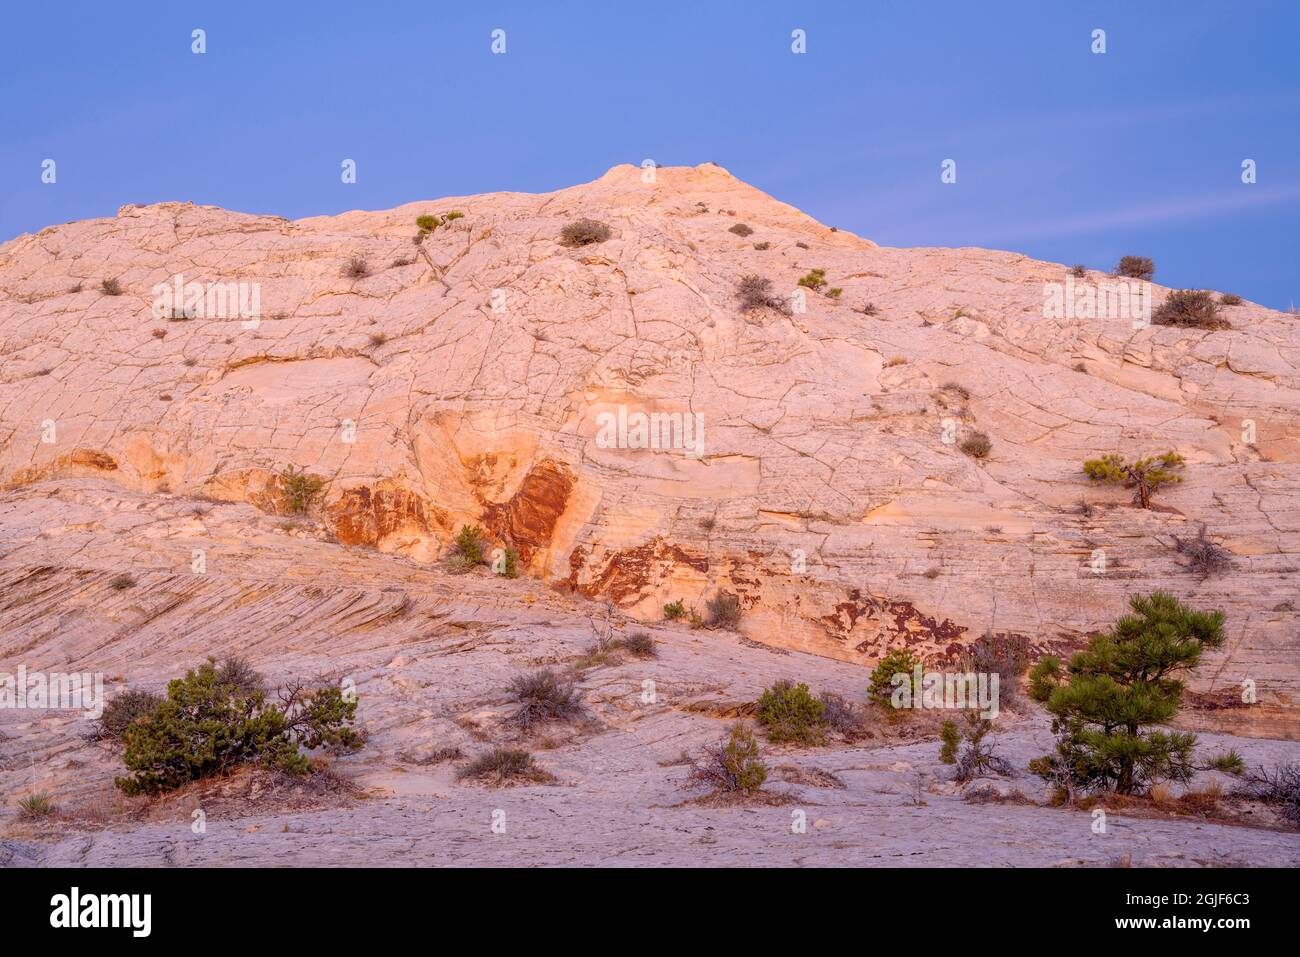 USA, Utah, Grand Staircase - Escalante National Monument, Dawn sky over eroded Navajo sandstone with scattered pinyon pine trees; near the Burr Trail. Stock Photo